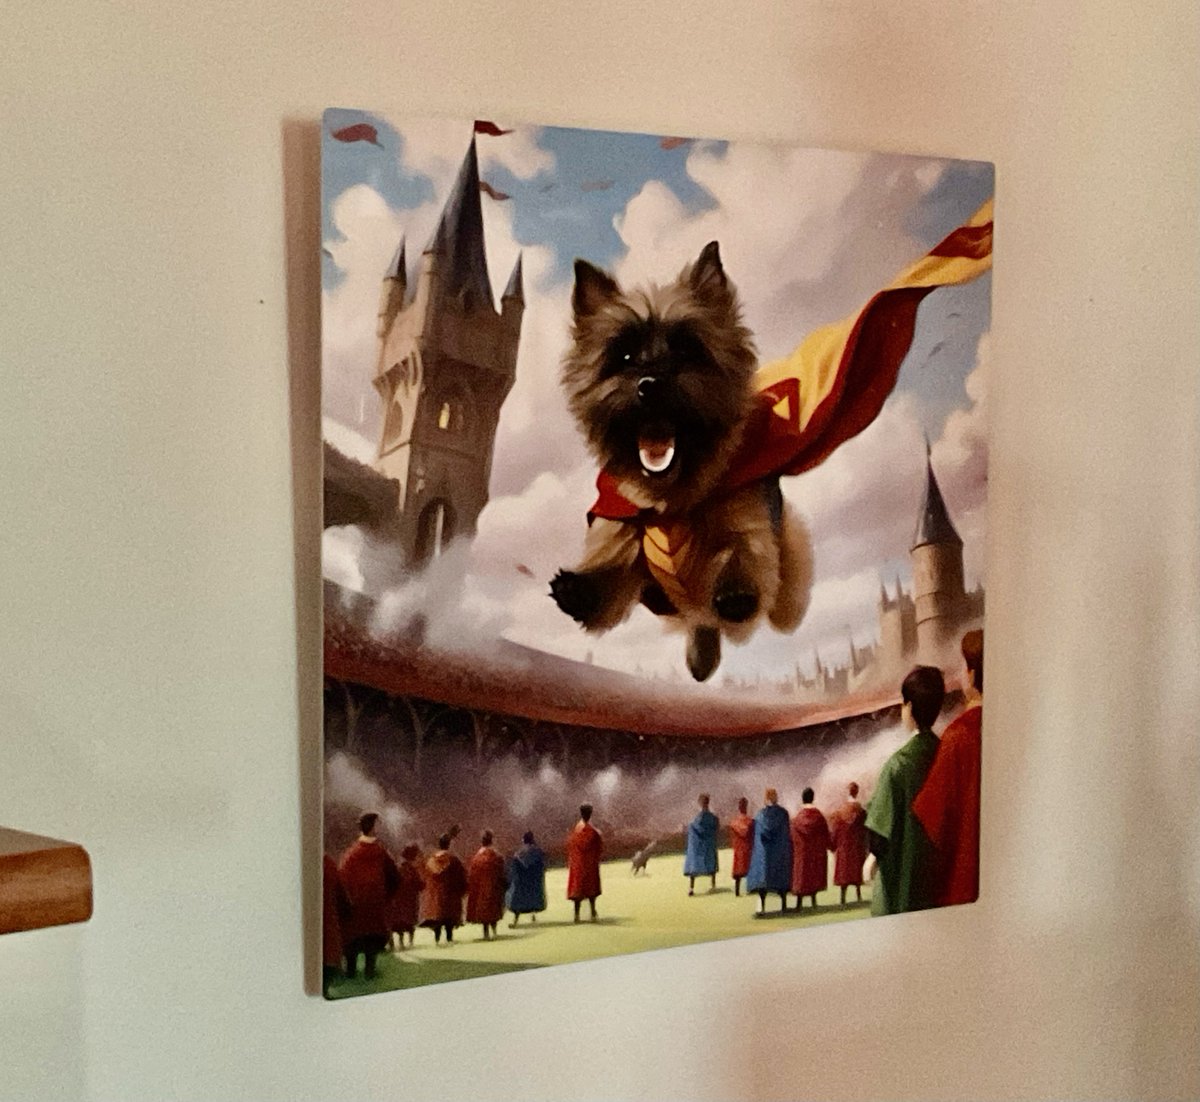 'I am a huge Harry Potter fan and when I saw this of Fiona, I thought she WOULD have been a Gryffindor!  She was brave and true.  Hanging in my office, this makes me smile several times a day!' 

- Katrina (happy PugMug customer)

#pugmugai #harrypotterdog #dogmemorial